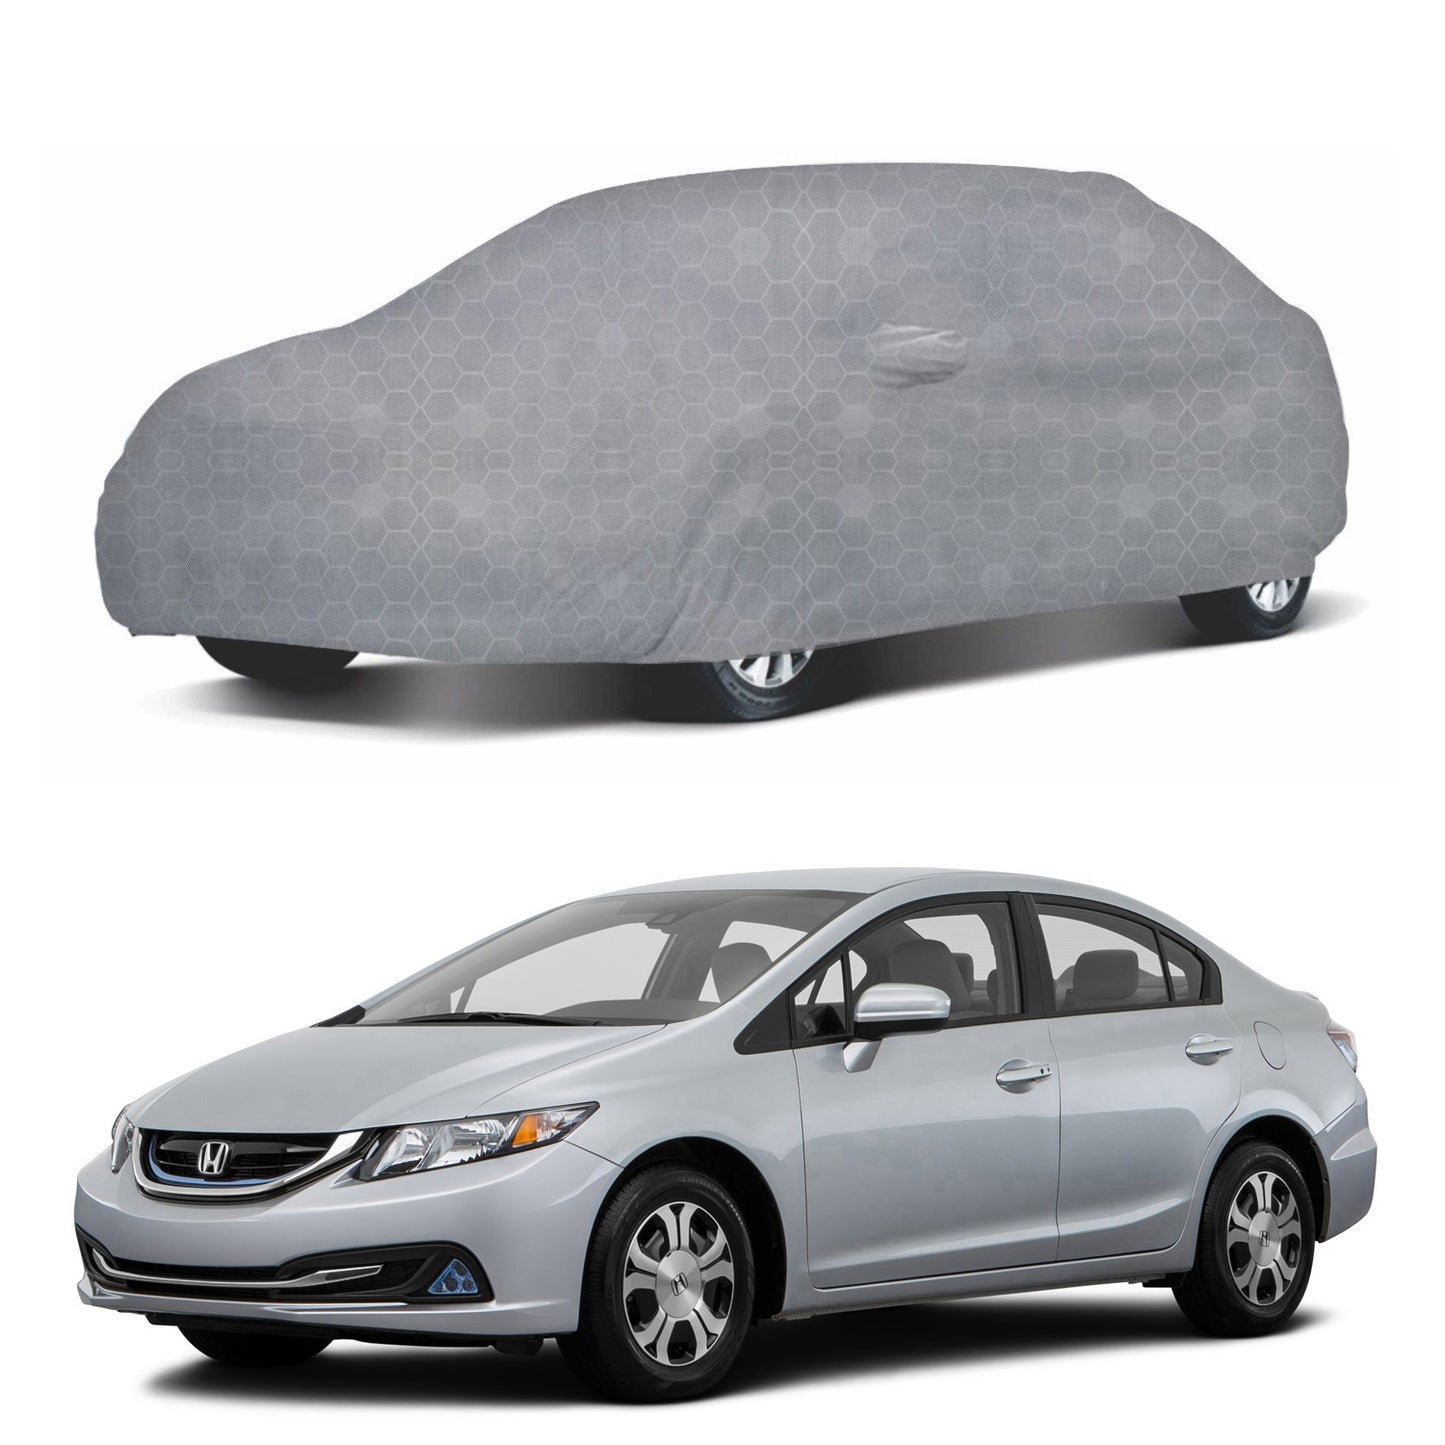 Oshotto 100% Dust Proof, Water Resistant Grey Car Body Cover with Mirror Pocket For Honda Civic